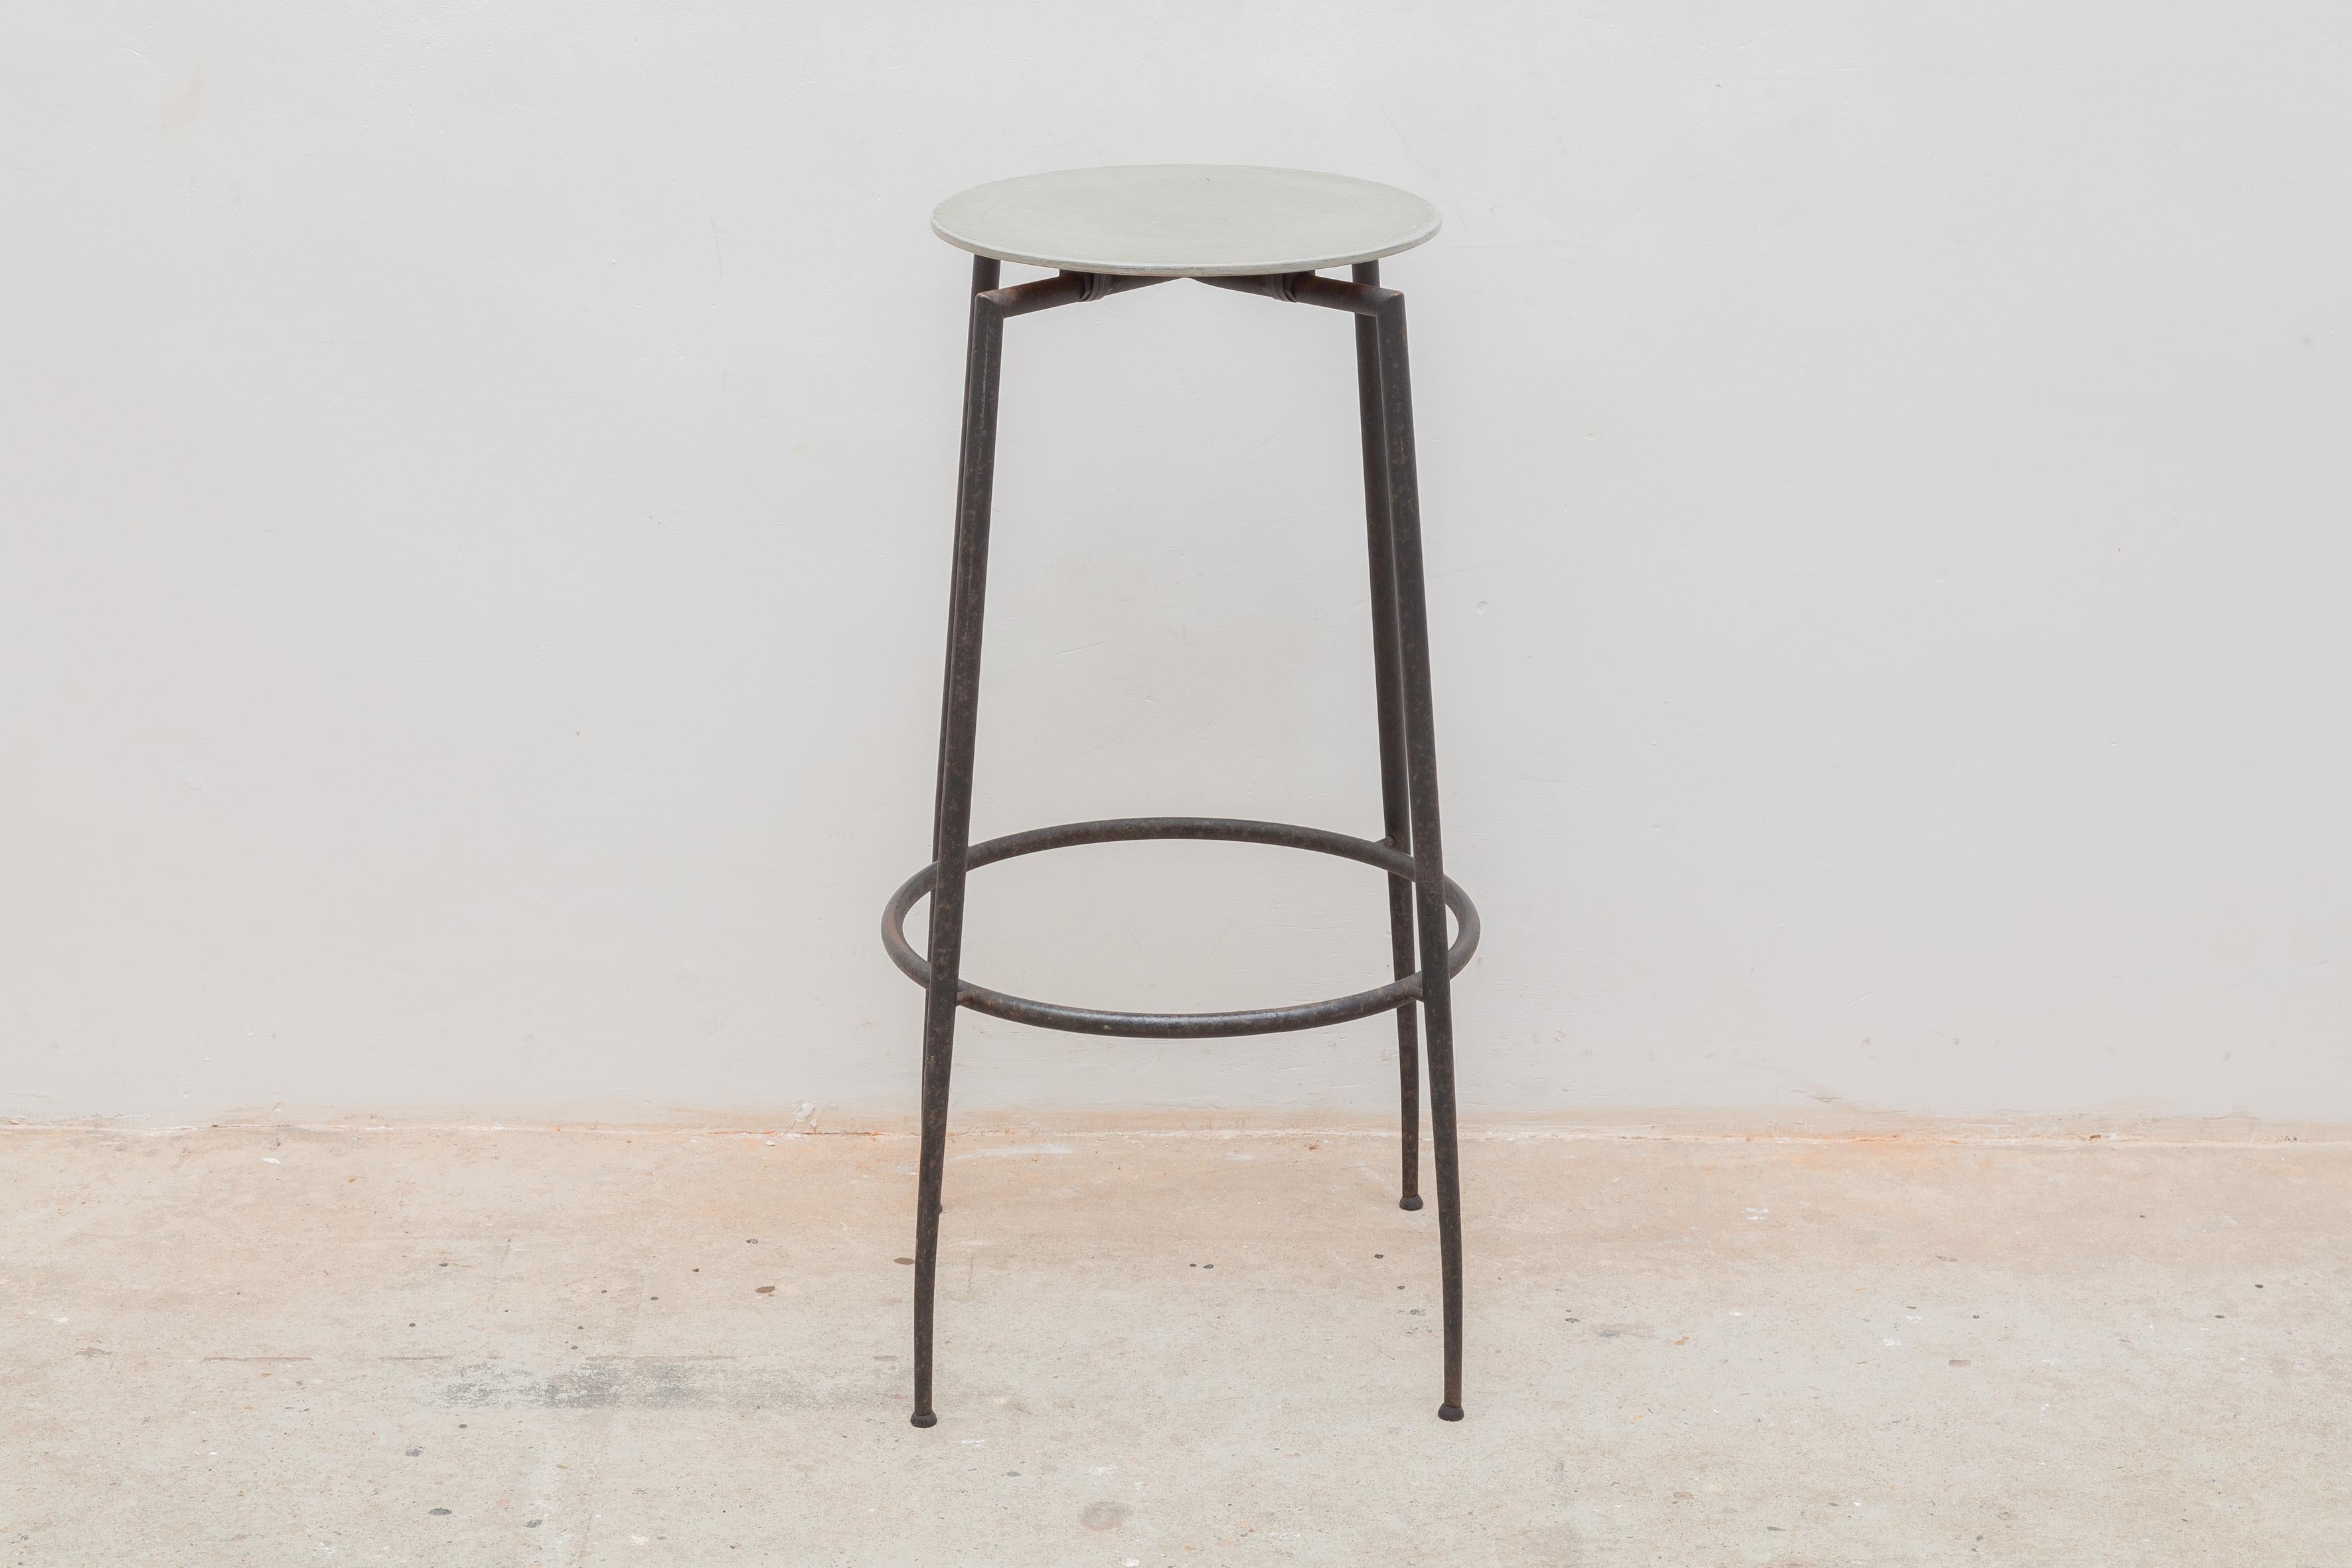 Scandinavian Modern Wrought Iron Industrial Foot Stools Designed by Foraform, Norway For Sale